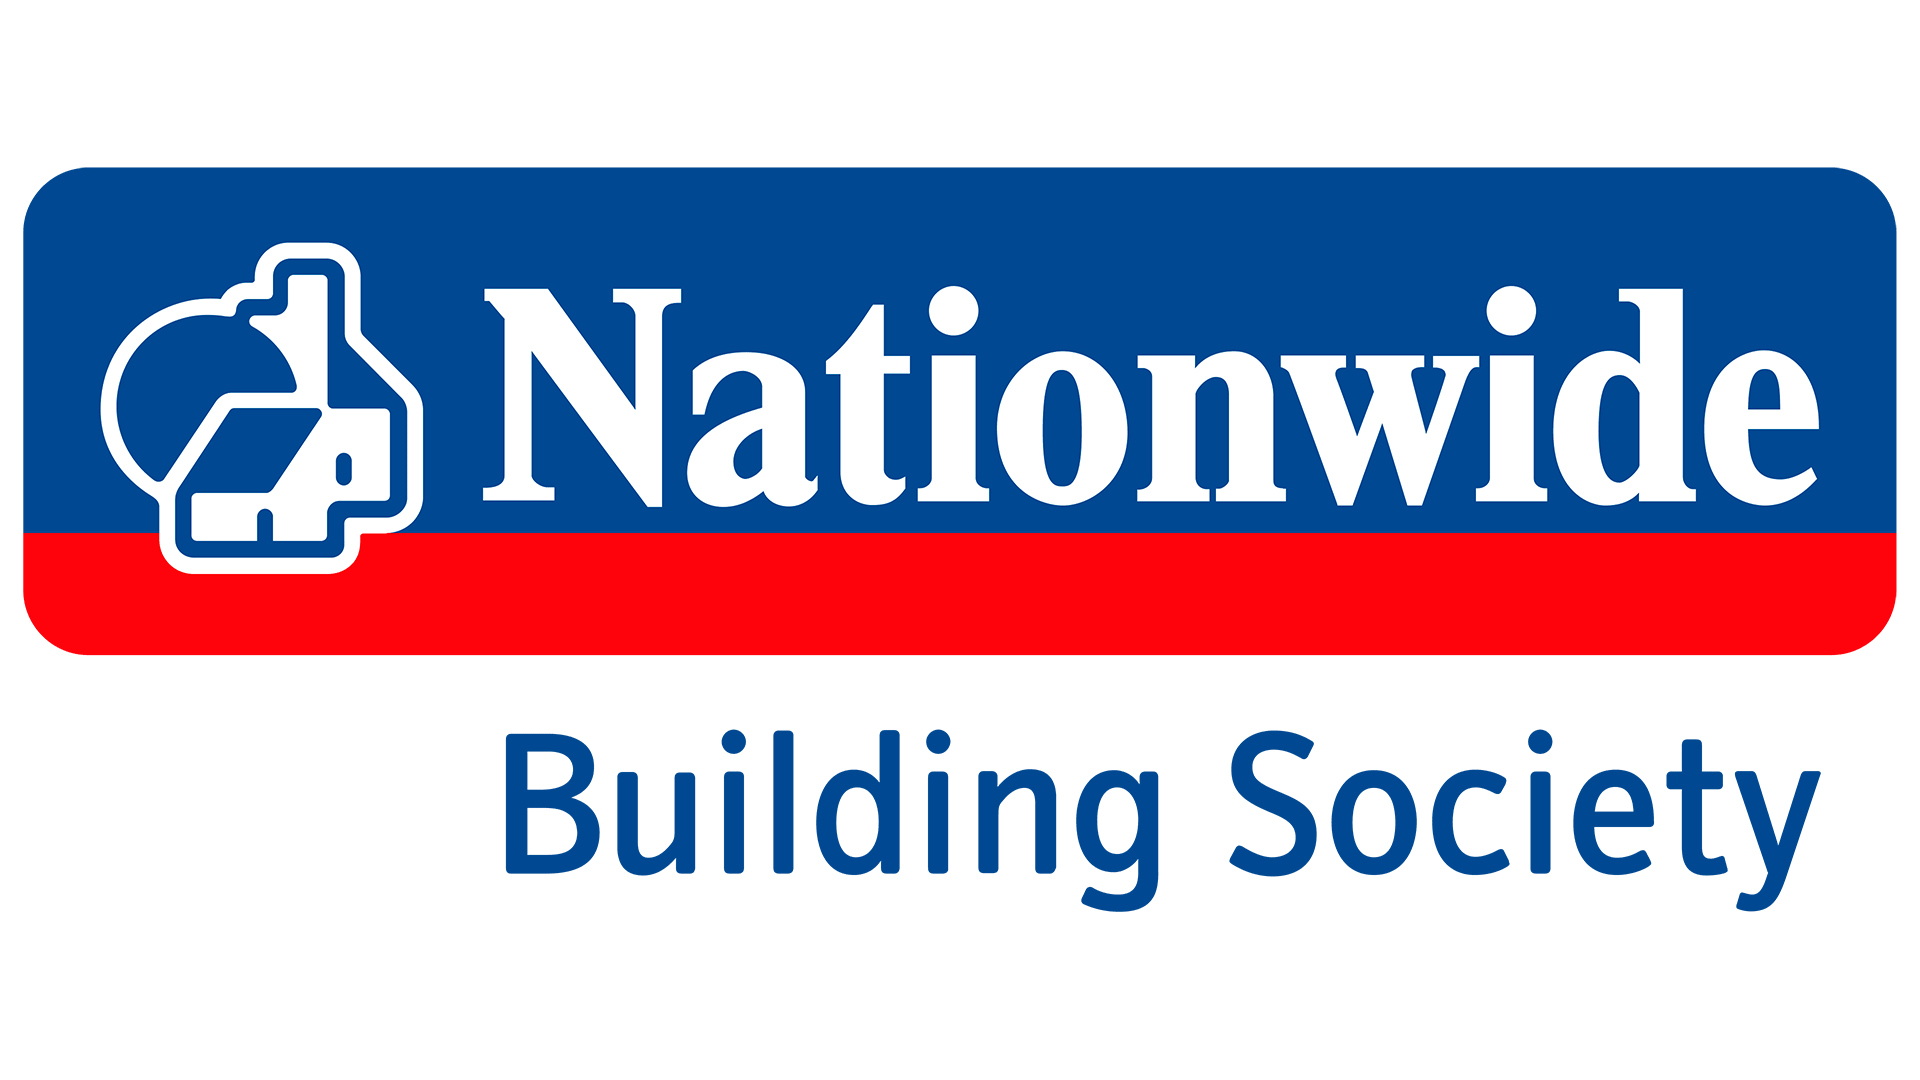 Chris Royston, Executive Resourcing Manager, Nationwide